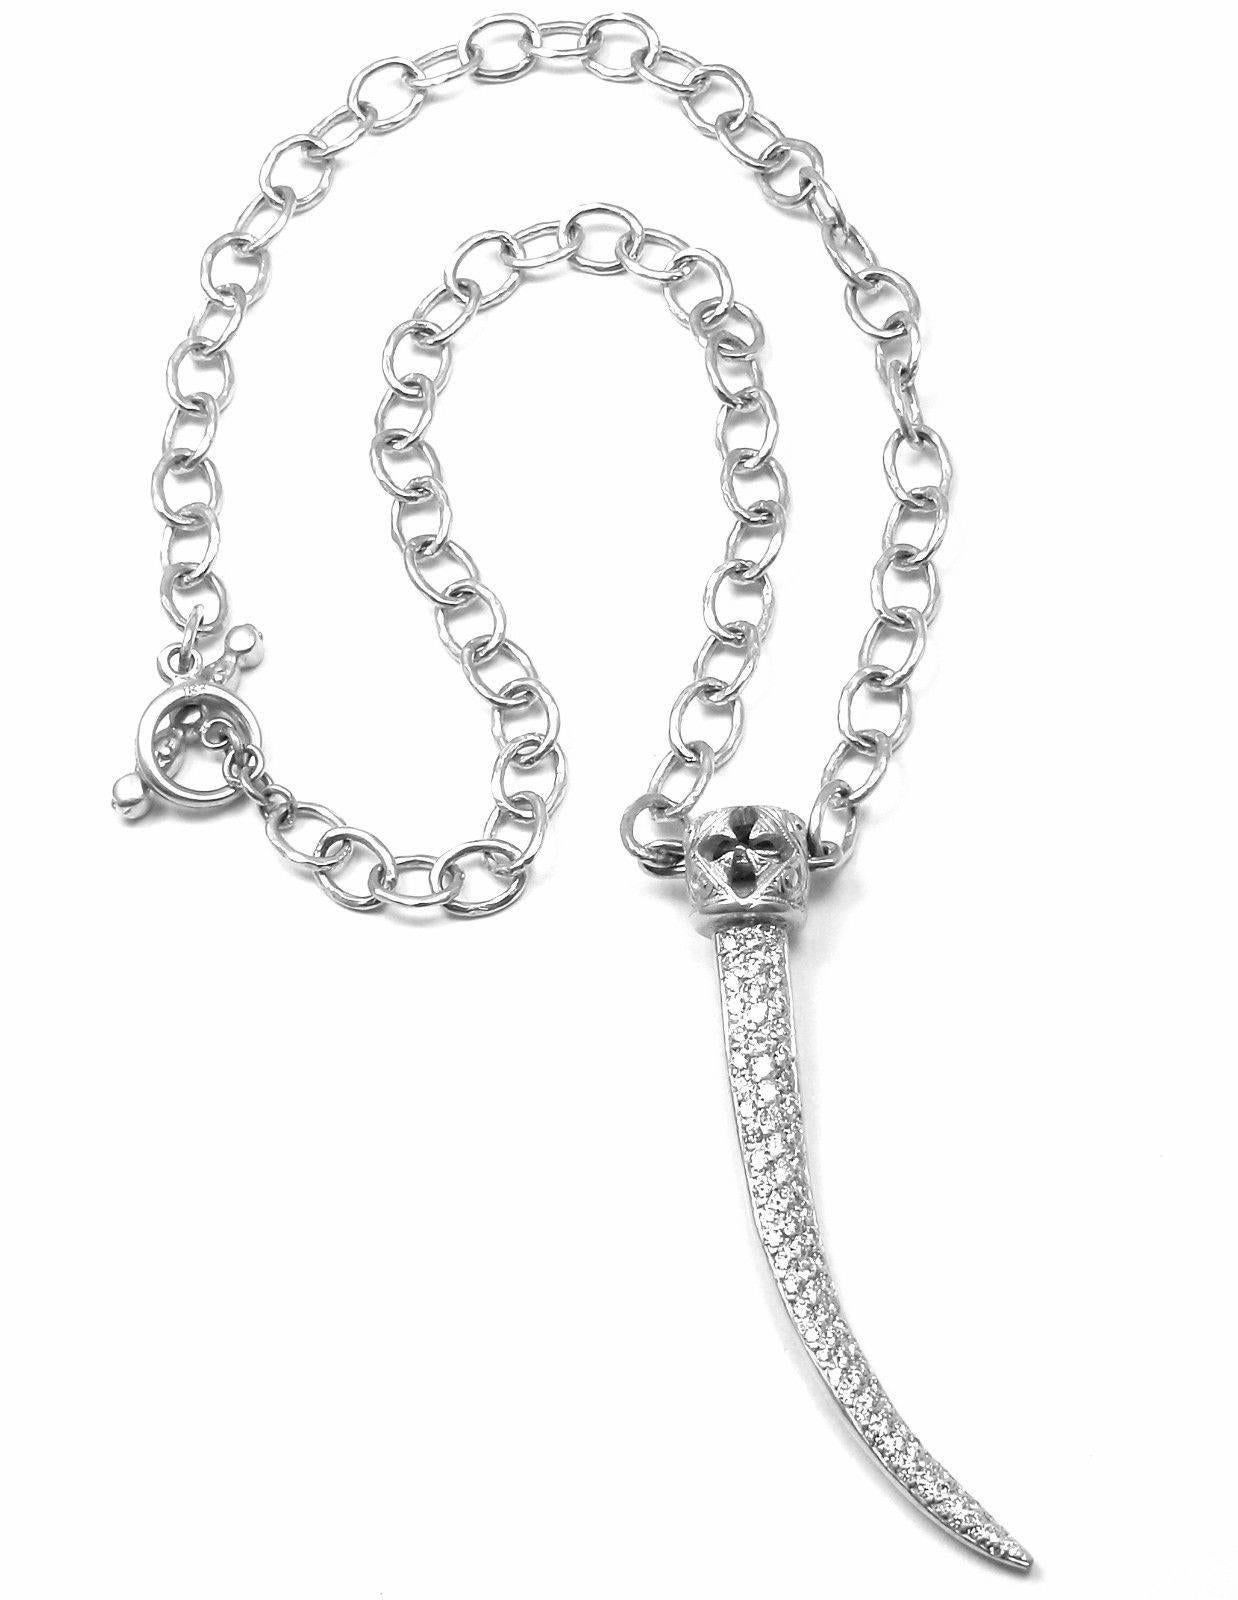 18k White Gold Diamond Large Claw Pendant Necklace by Loree Rodkin. 
With Round diamonds estimated total diamond weight 1.450cts
This This necklace used to belong to Jackie Collins and was 
purchased from her jewelry estate collection.

Details: